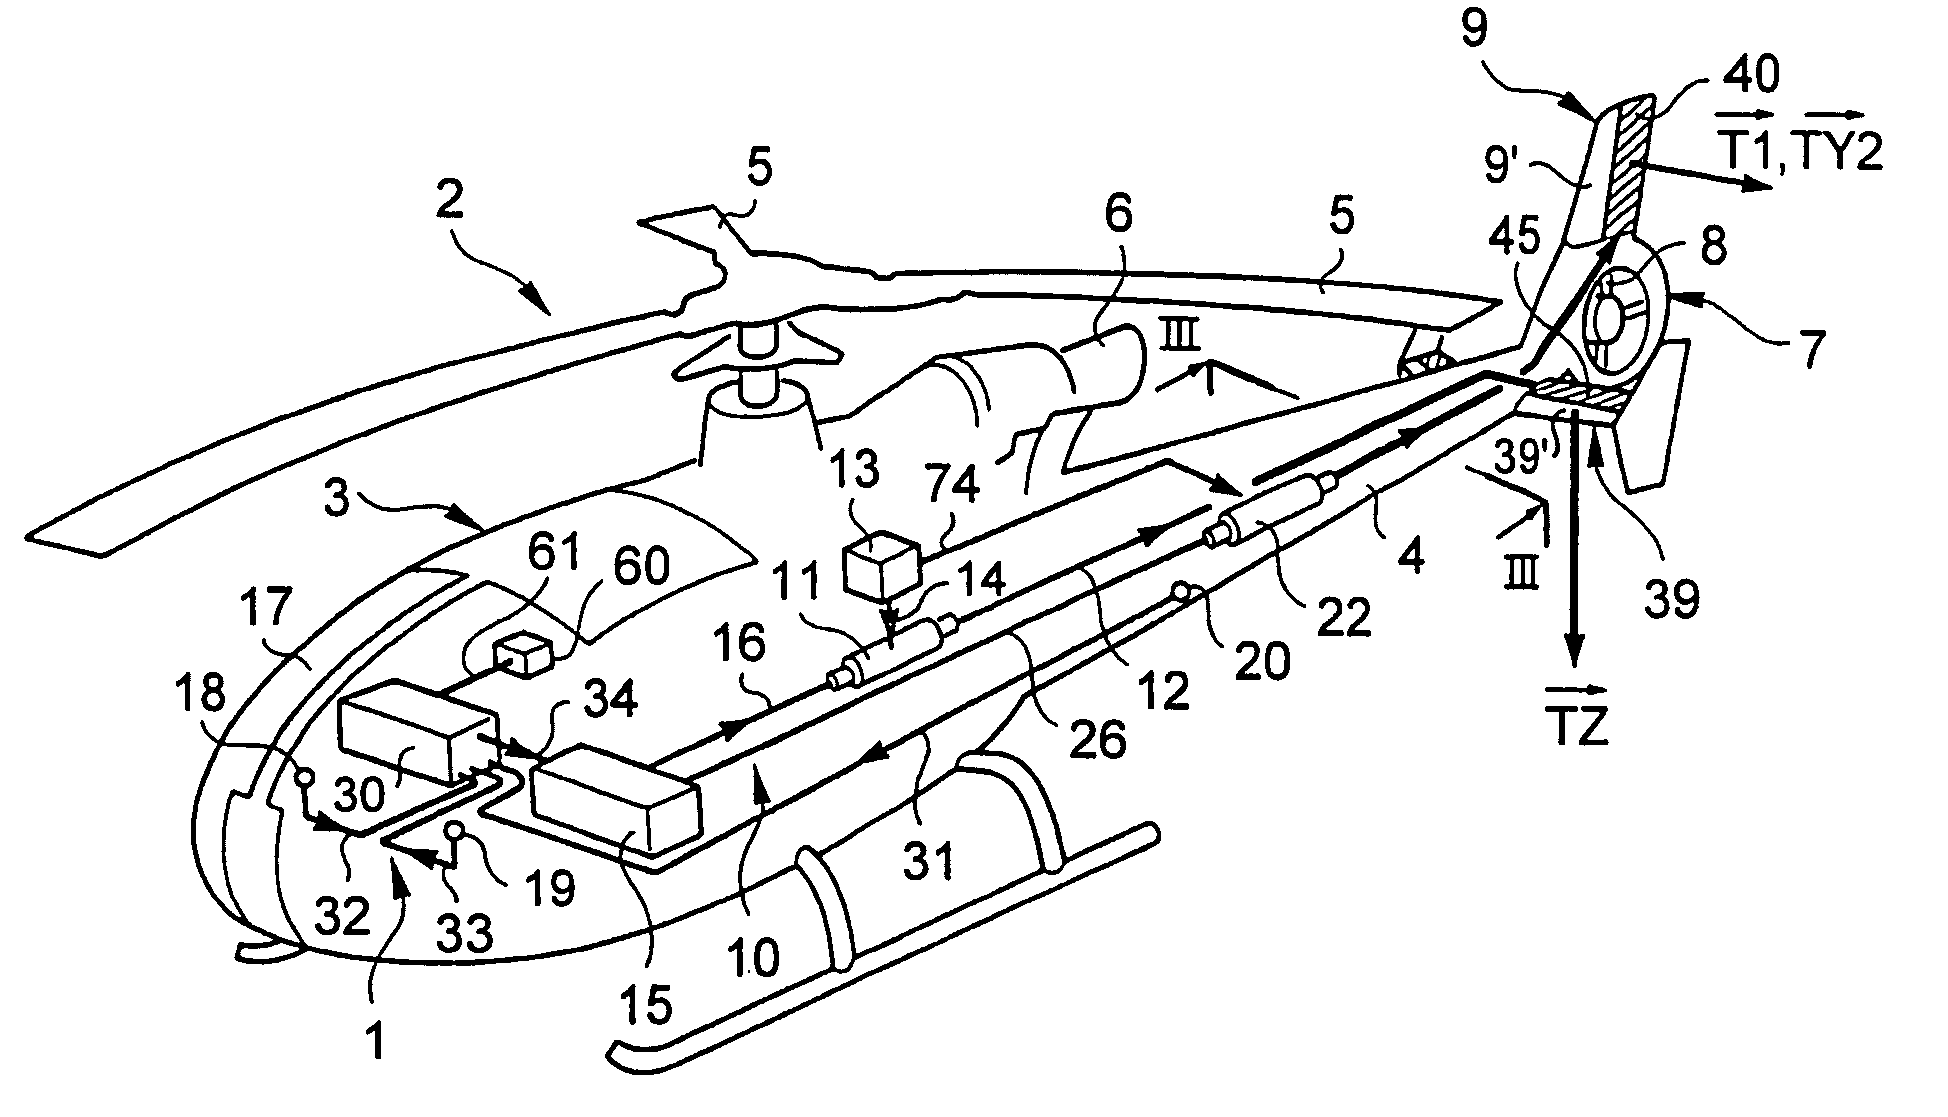 Method for using a tiltable stabilizer to reduce vibration generated on the fuselage of a helicopter